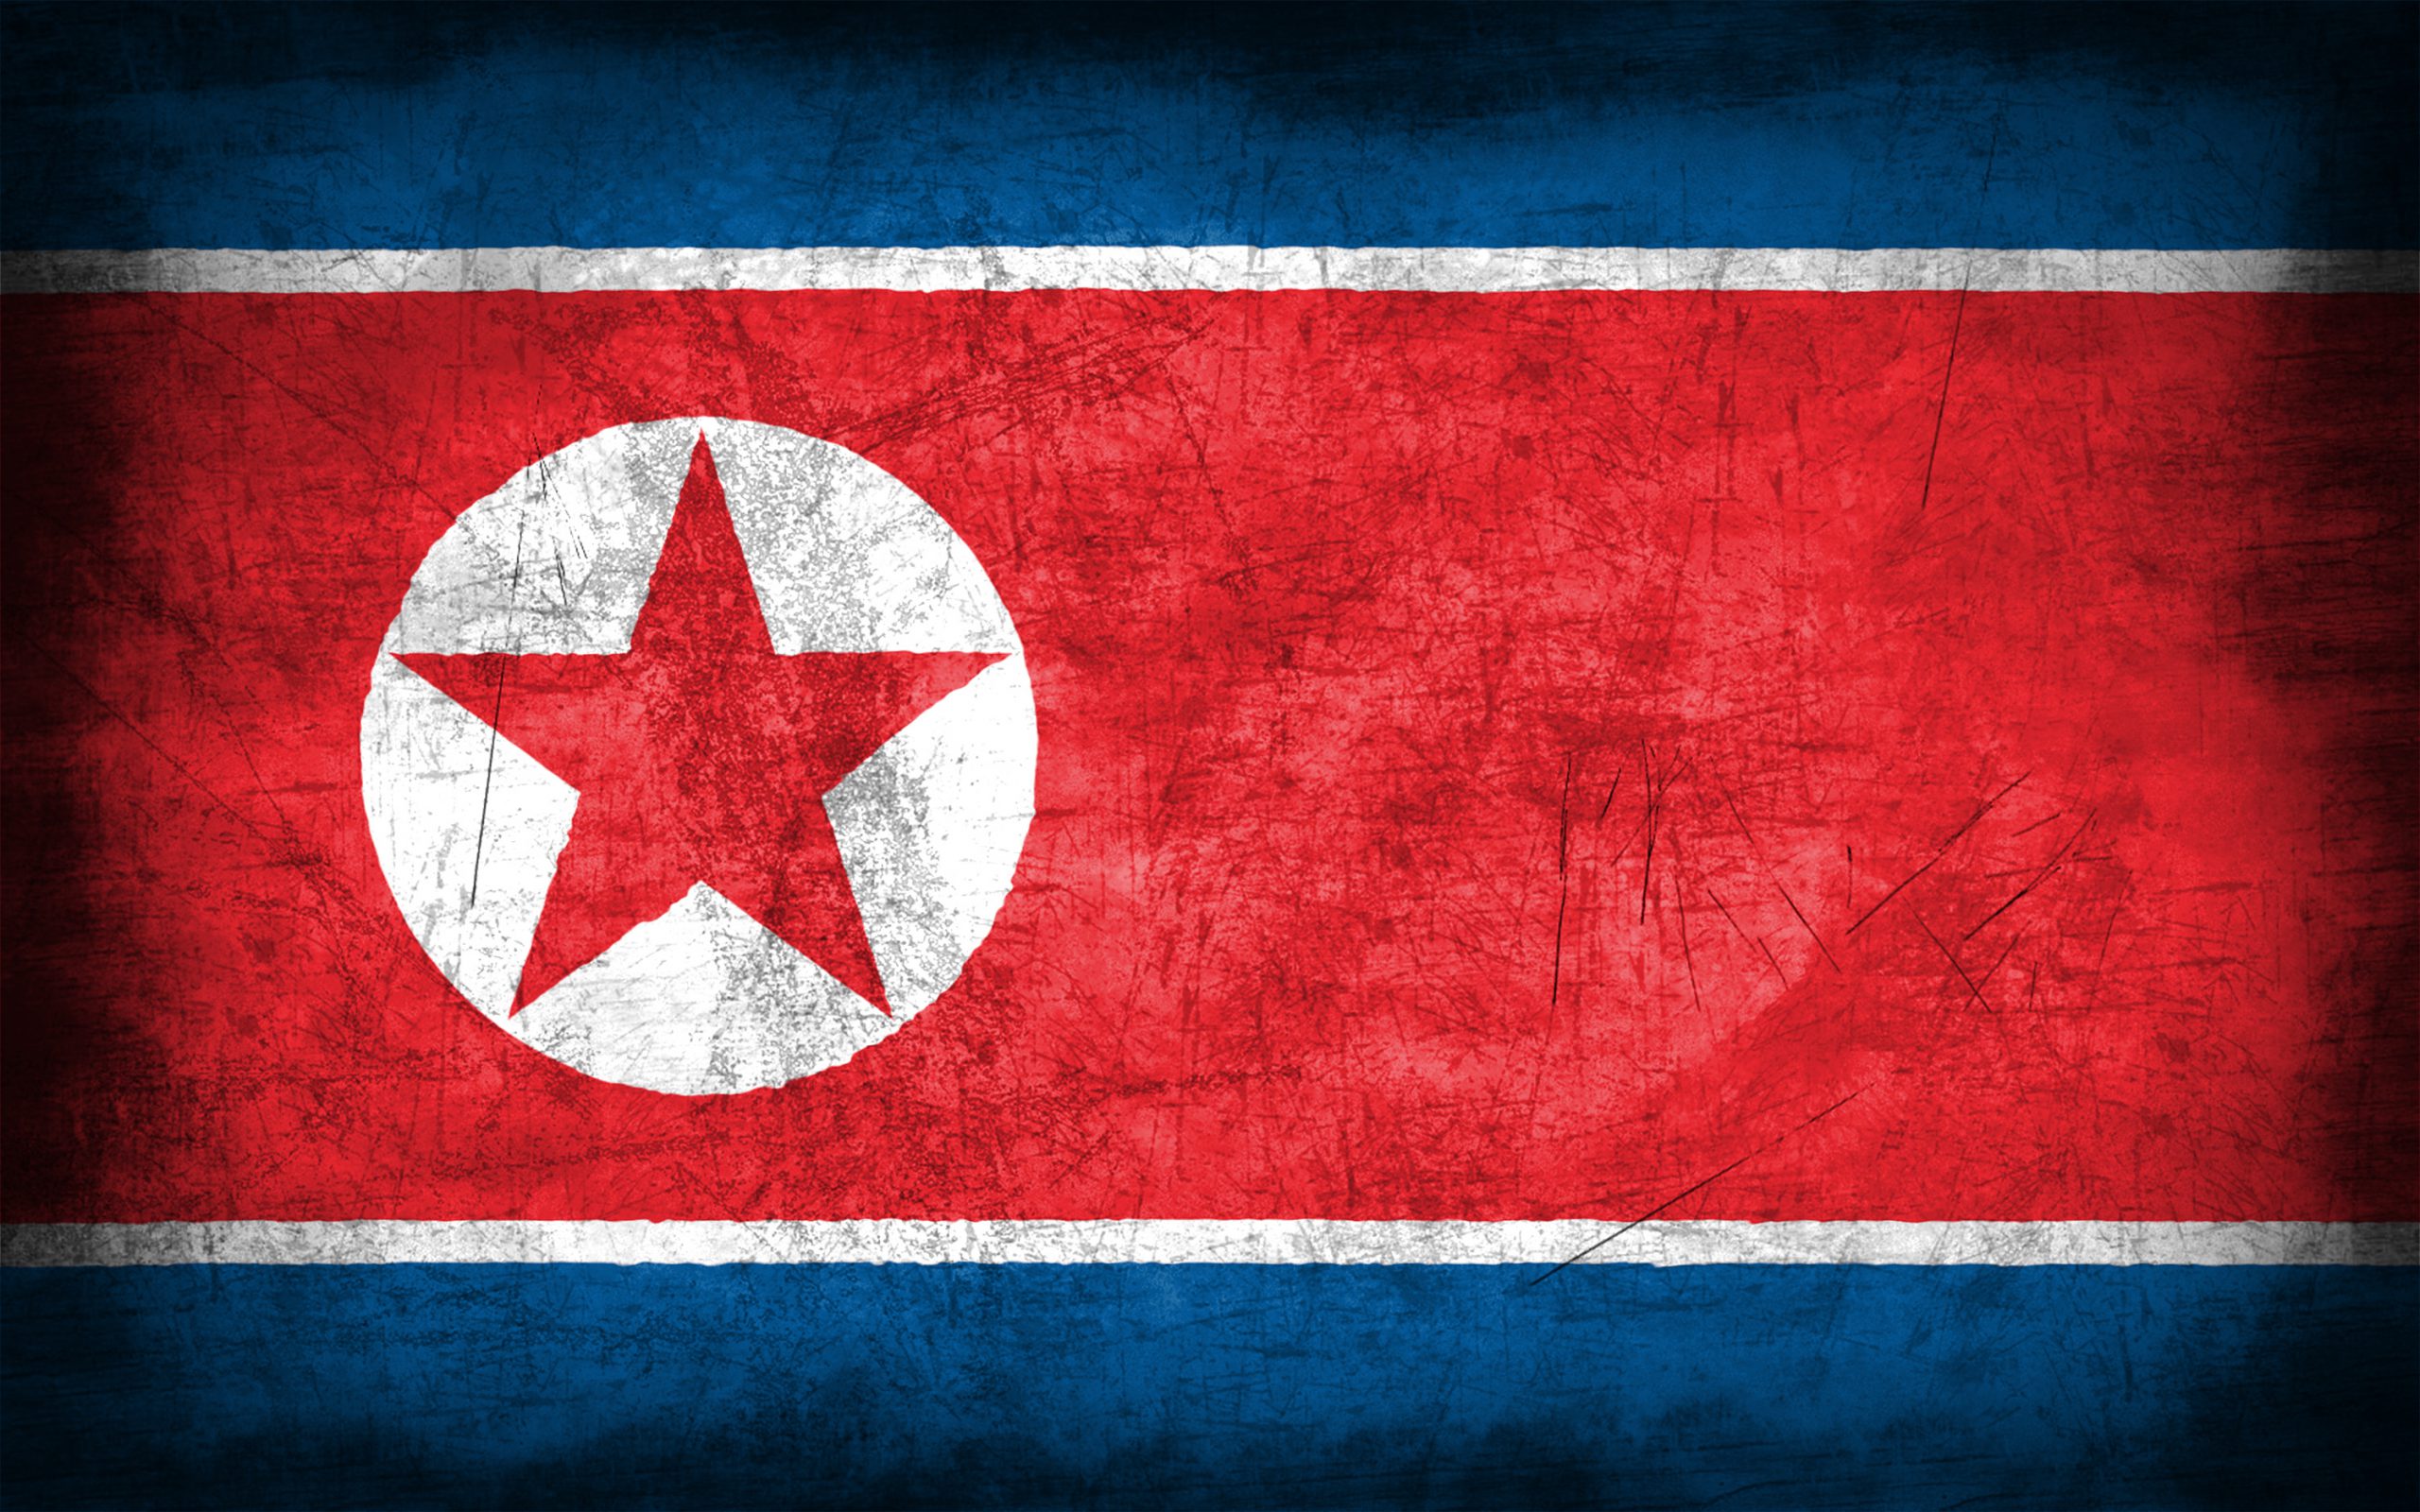 North Korea [What Think Tanks are thinking]